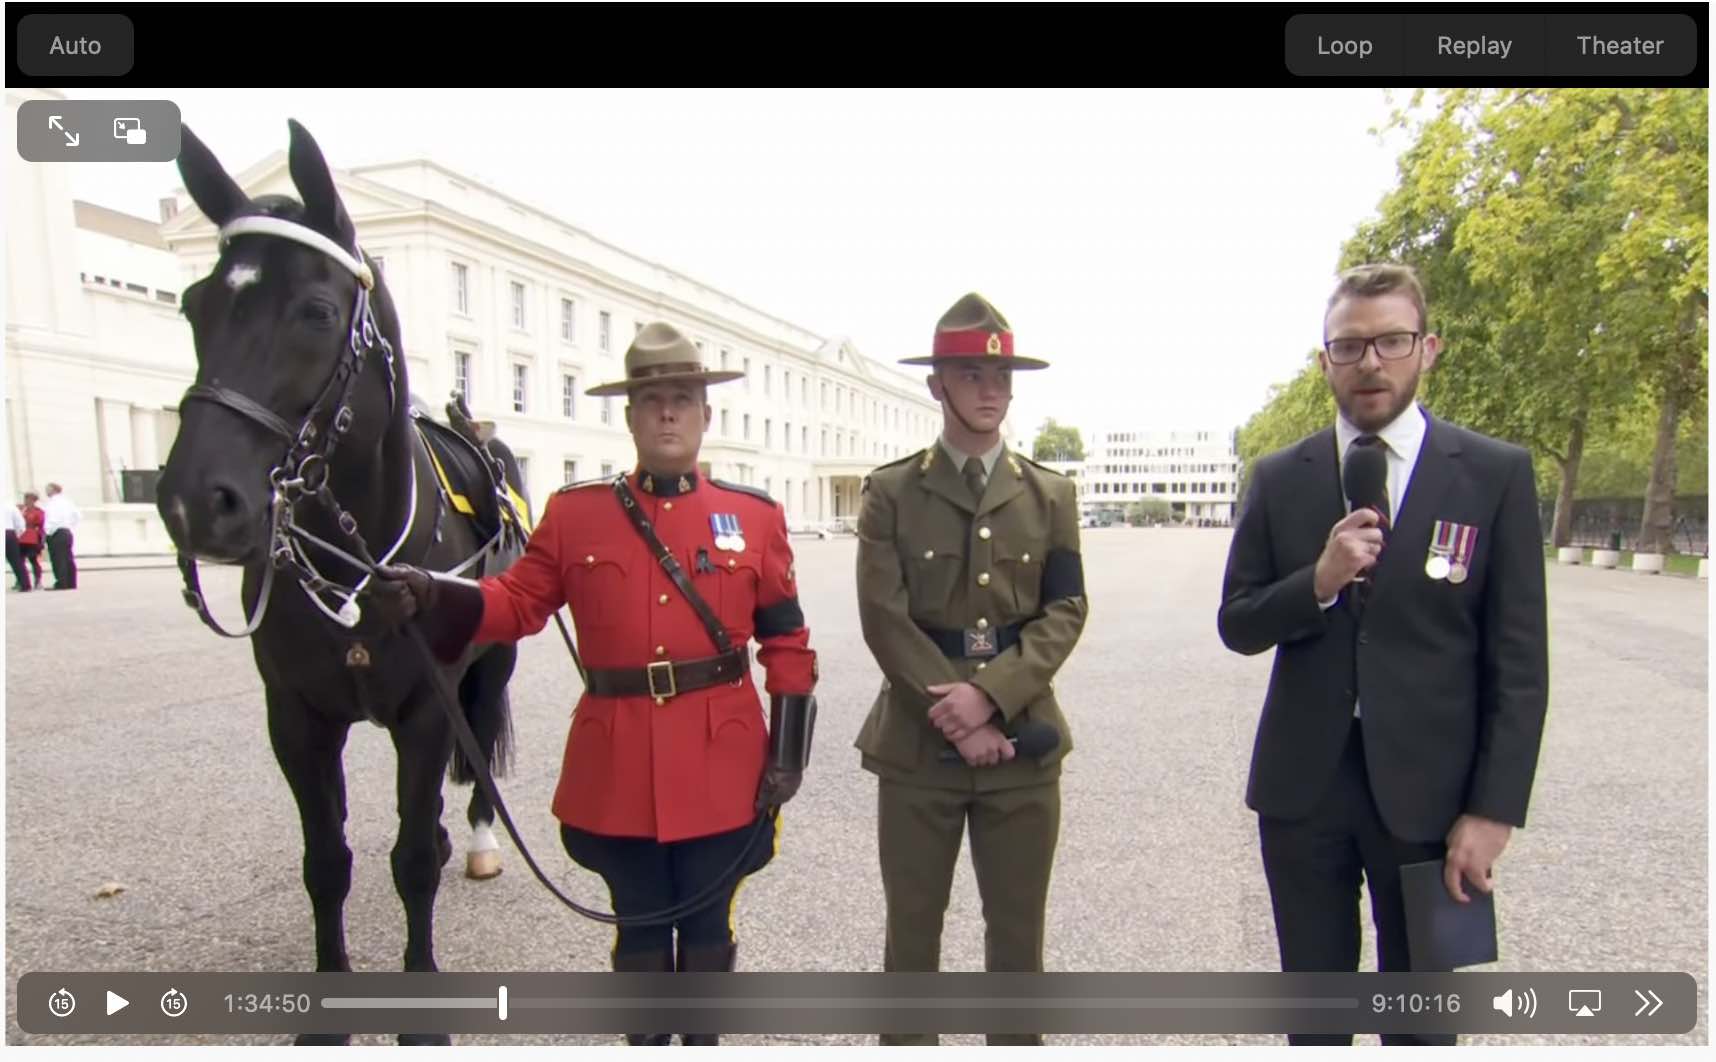 Mountie (with horse), and the Kiwi lad, with interviewer. 